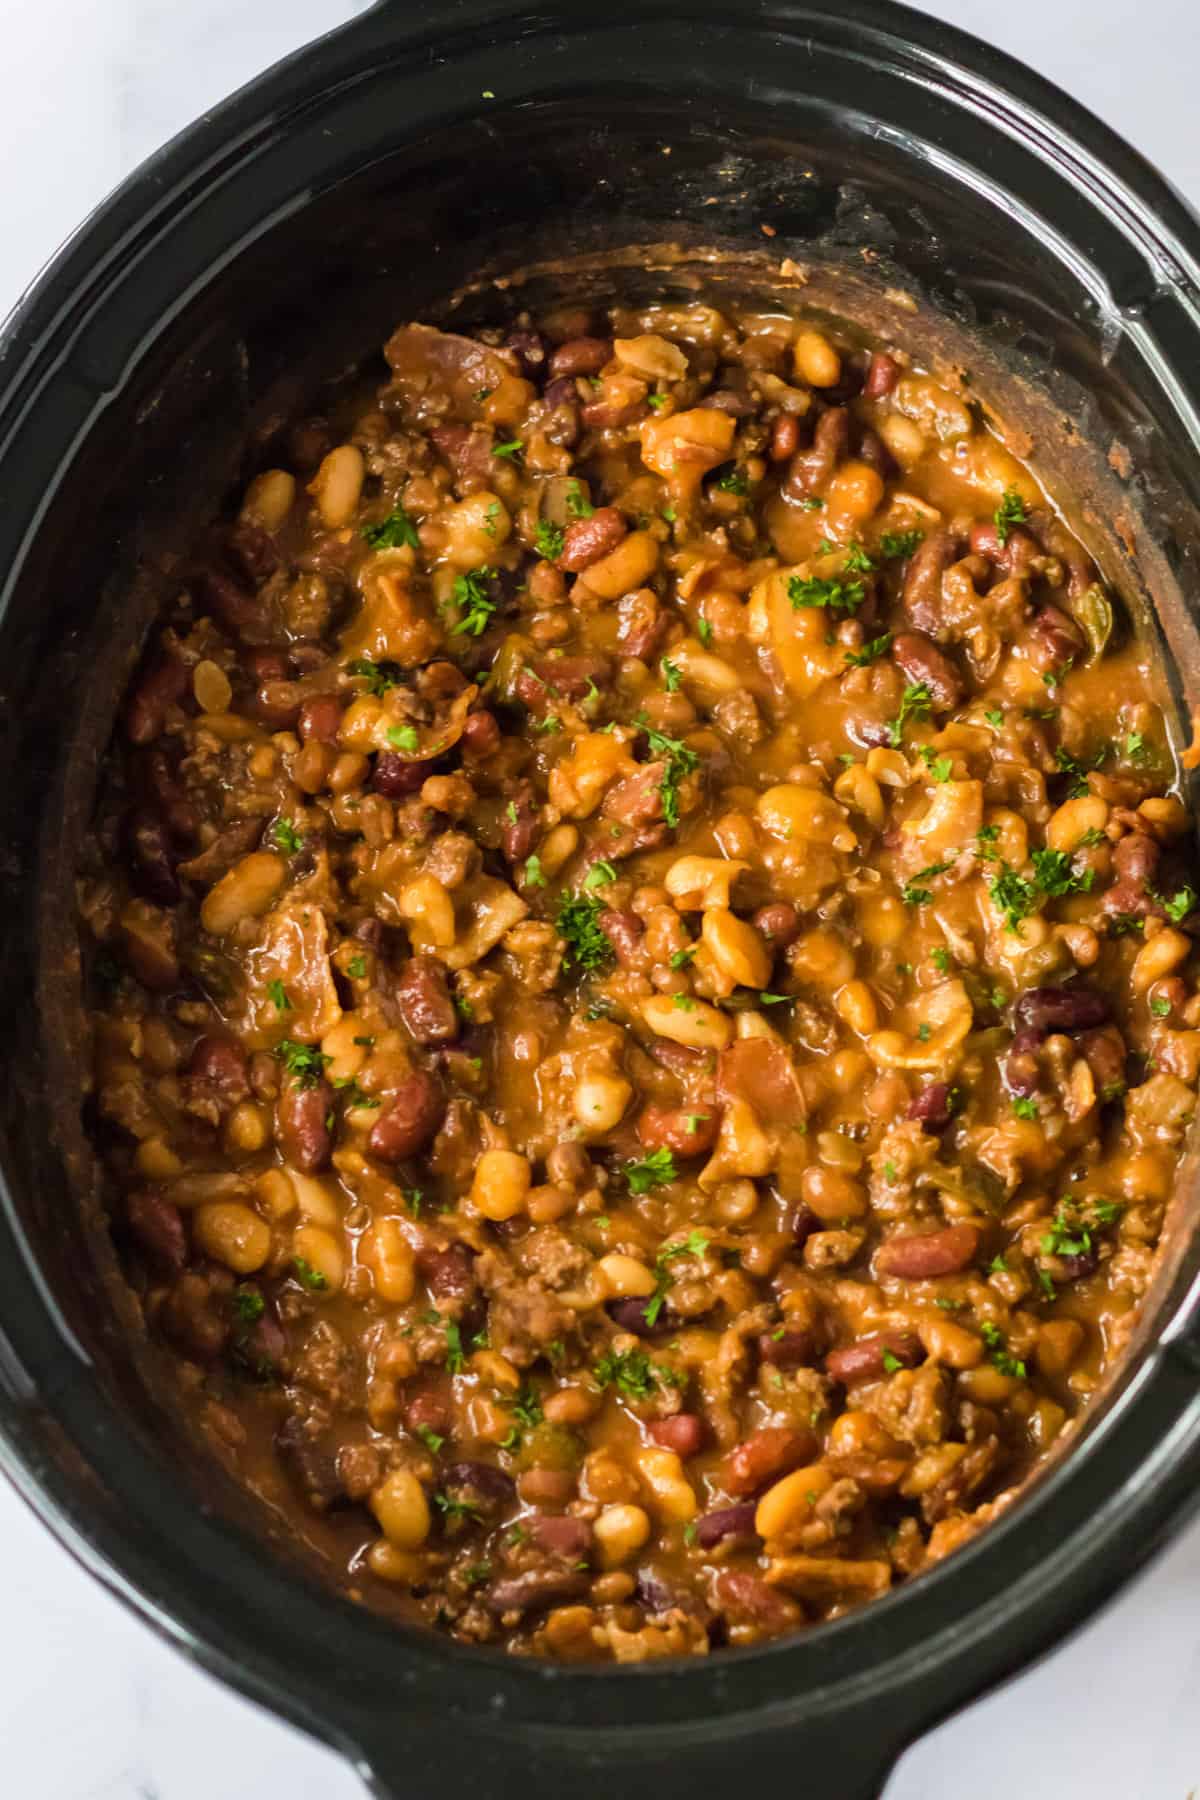 Calico beans in the slow cooker.